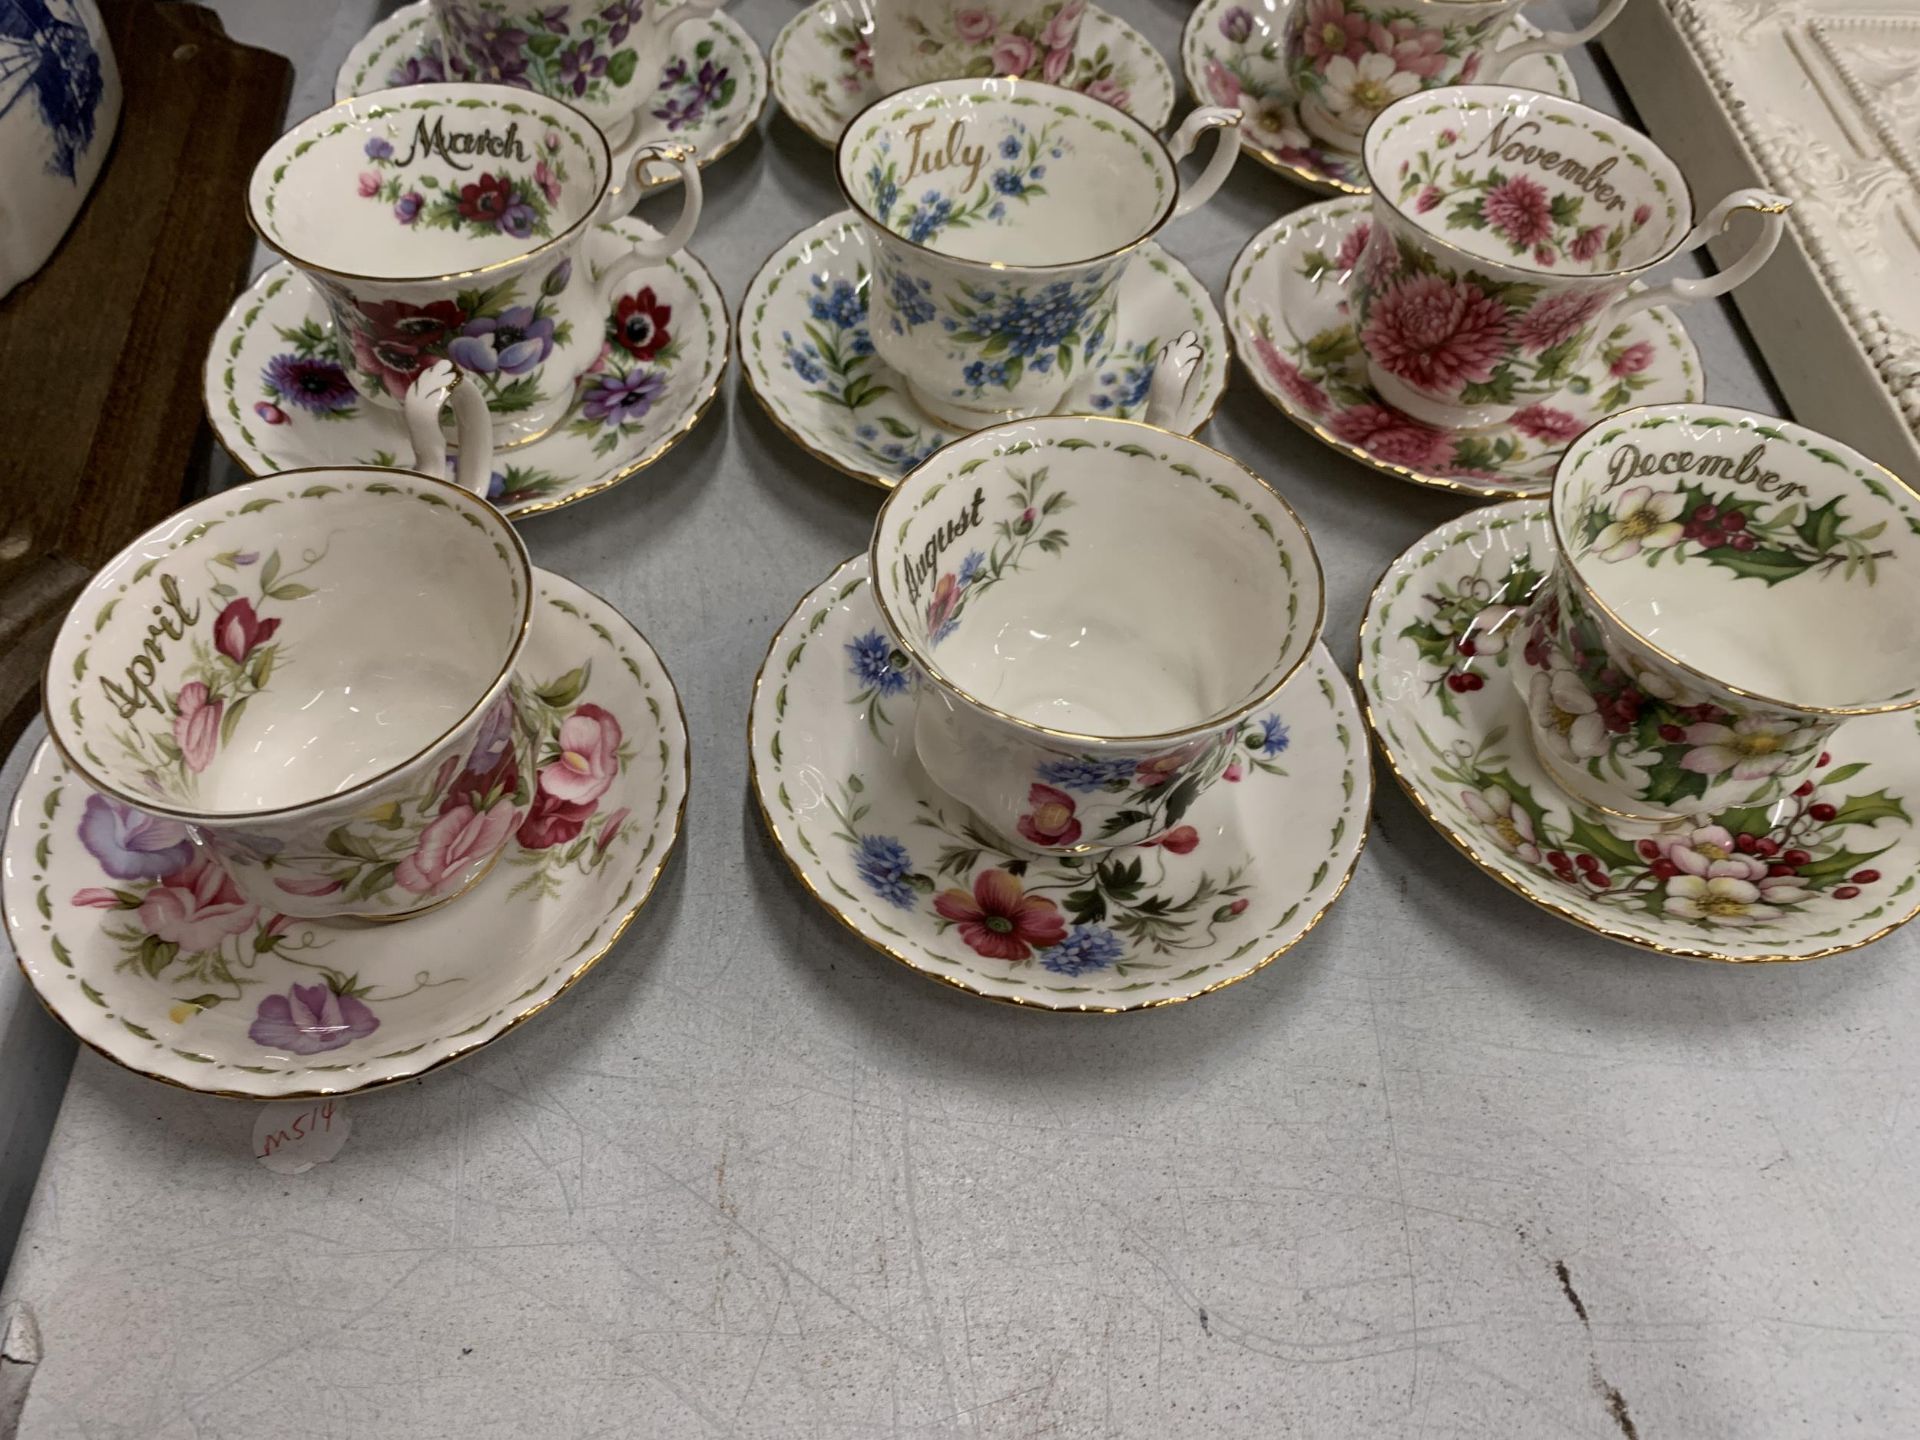 A COMPLETE SET OF ROYAL ALBERT FLOWER OF THE MONTH CUP AND SAUCERS - Image 3 of 5